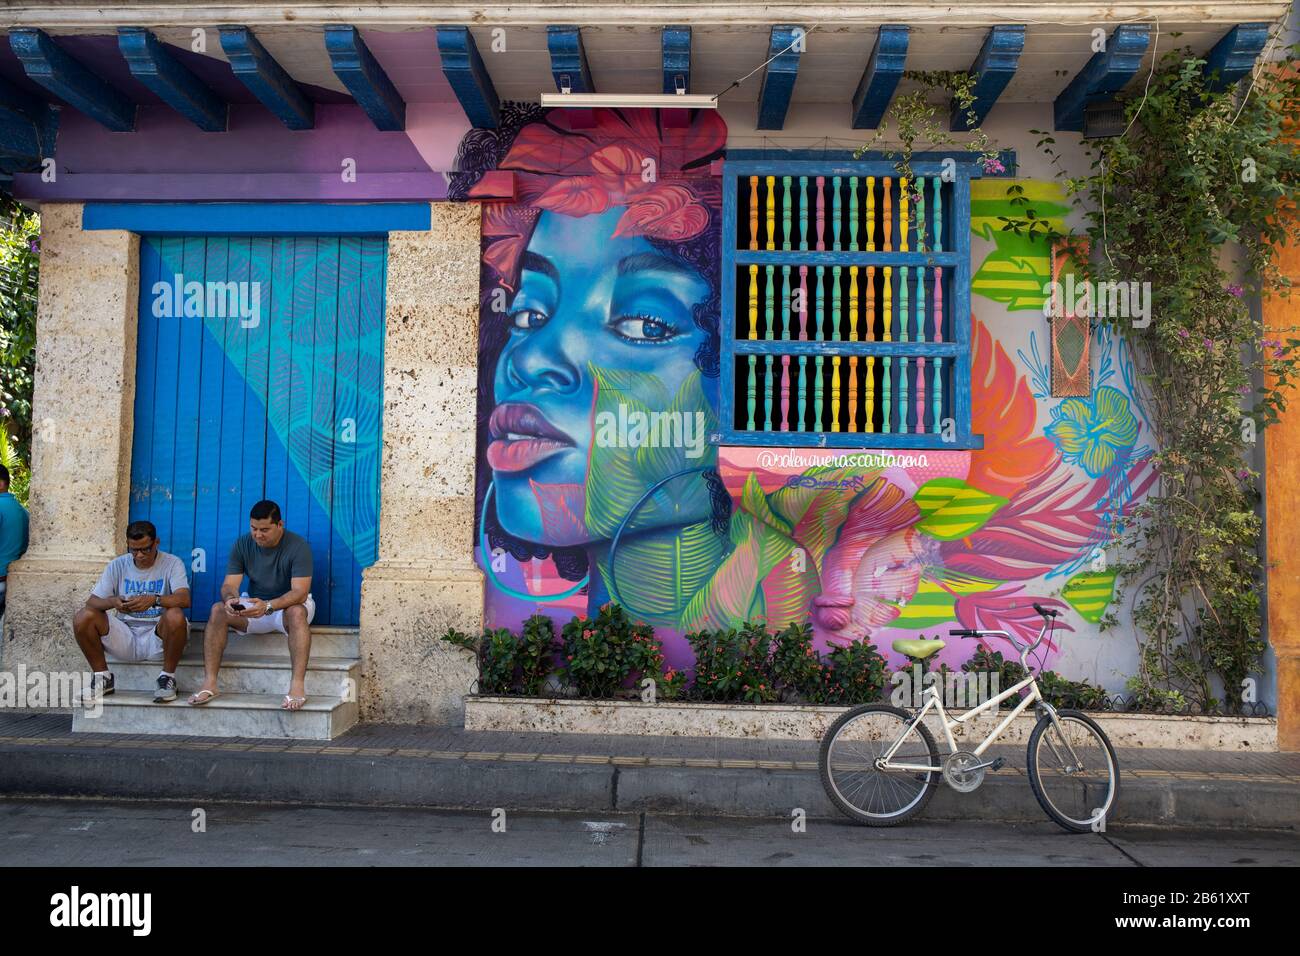 Plaza de la Trinidad is the main square and meeting place in Getsemani and is surrounded by many wonderful murals and street art. Stock Photo